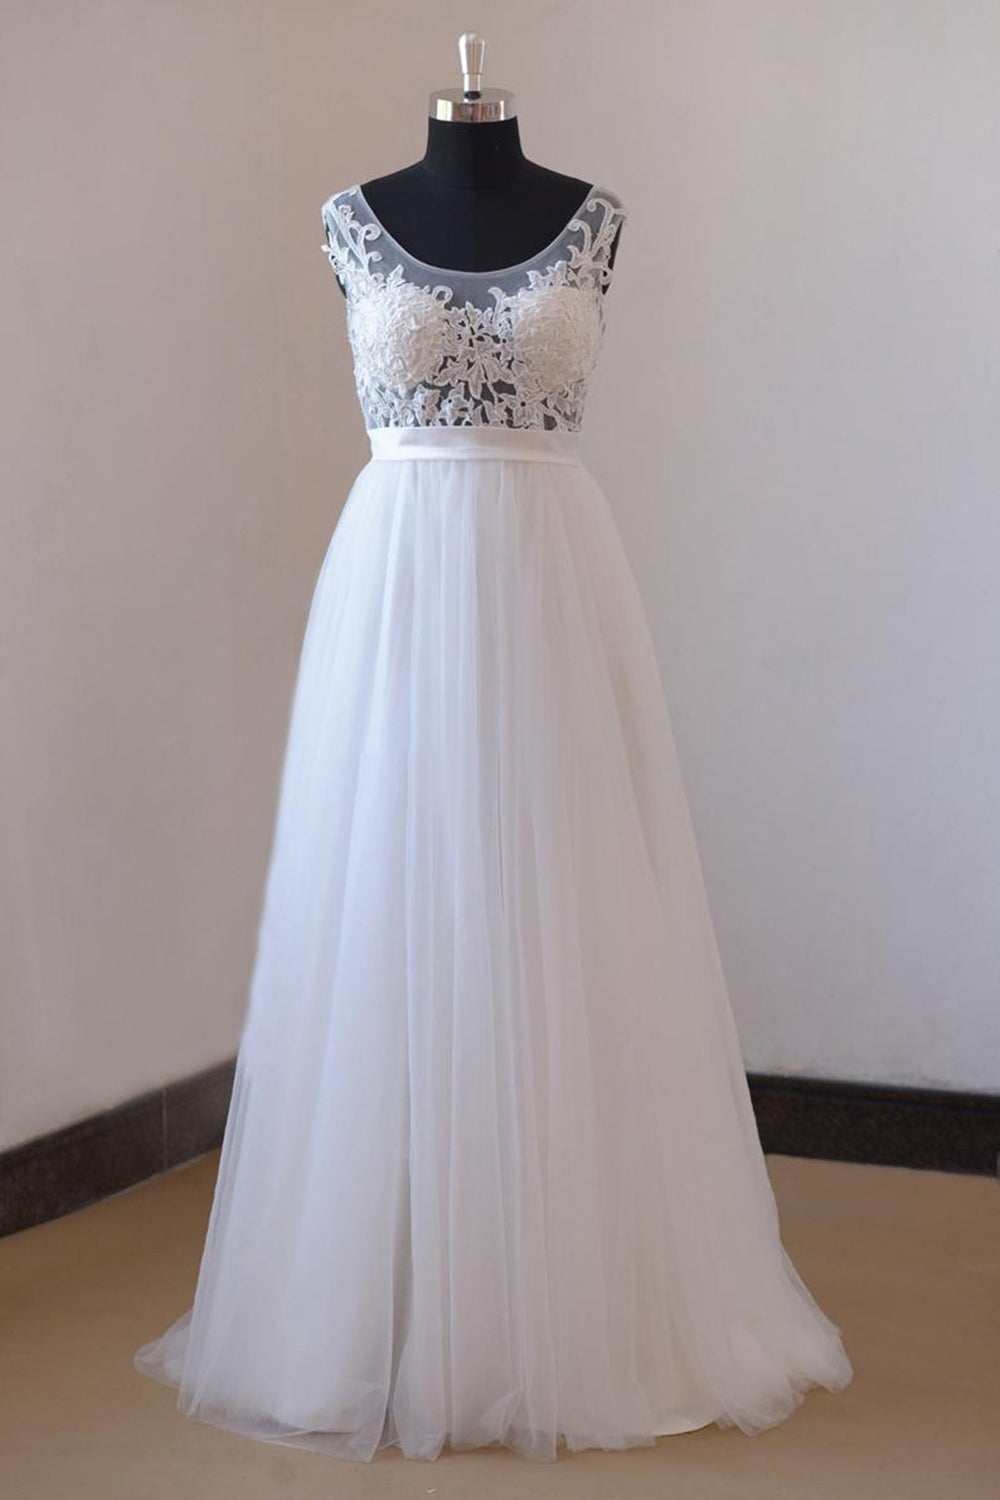 Gorgeous Jewel Appliques Sleeveless Wedding Dress Tulle Ruffles White Bridal Gowns On Sale